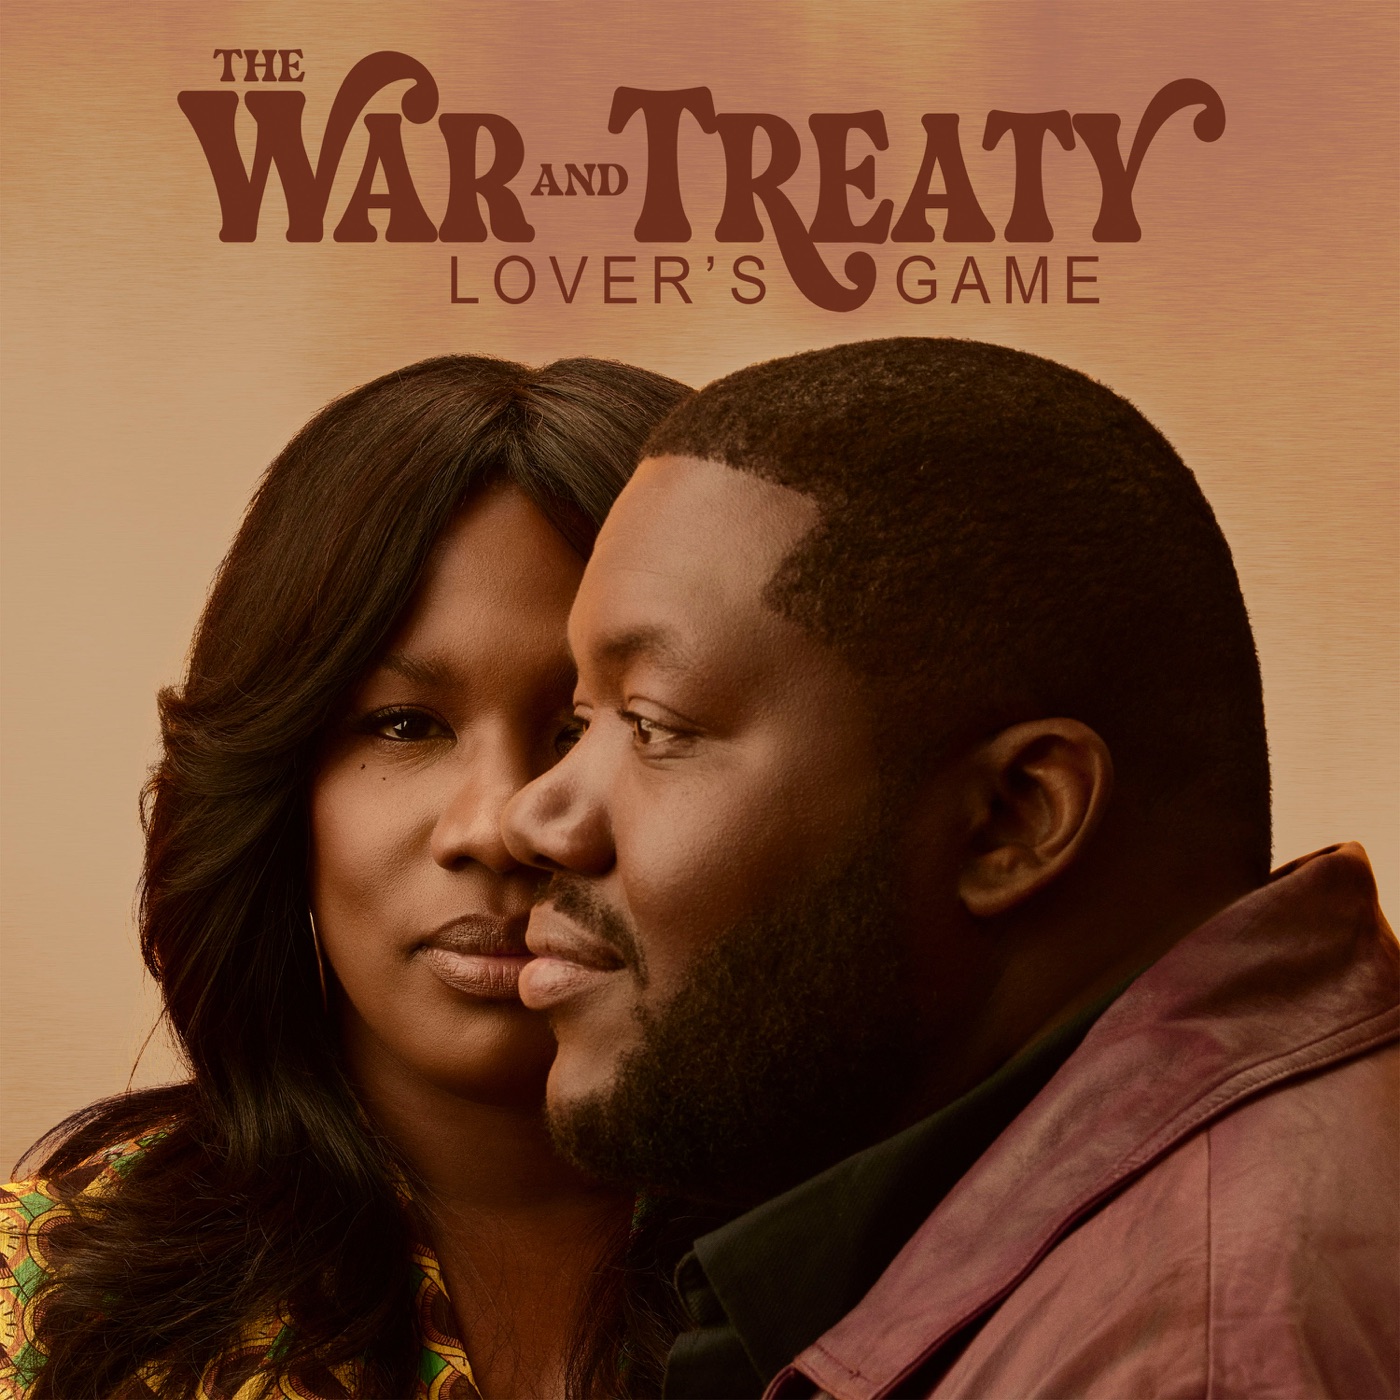 Lover's Game by The War and Treaty, Lover's Game